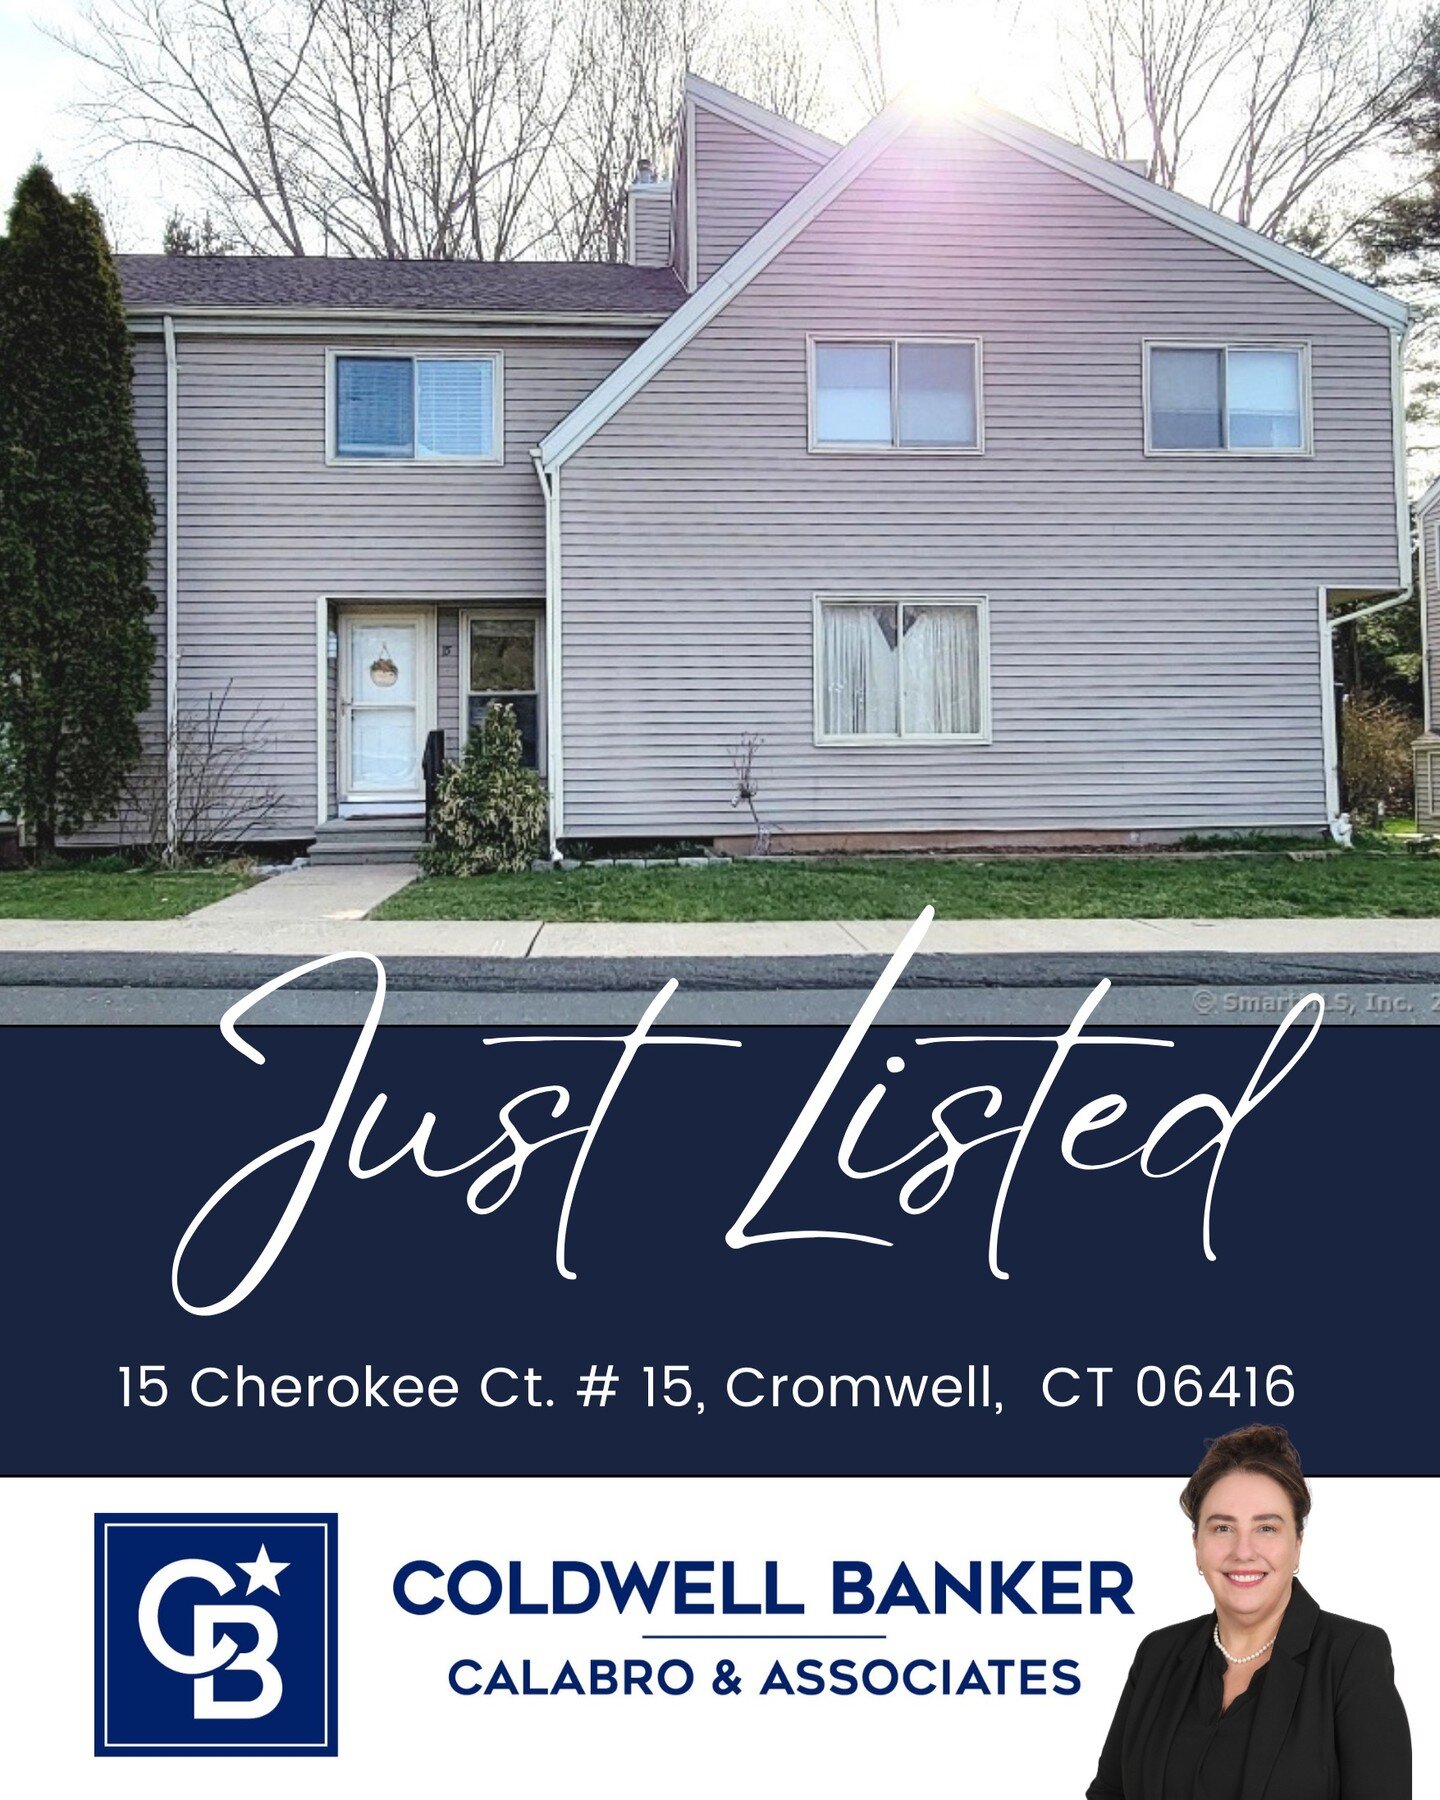 Congratulations to Barbara on her new listing at 15 Cherokee Ct in Cromwell! 🏠

Just listed in sought-after Oxford Park! This well-maintained 2-bedroom, 2-bath end unit is bright and open. Central air, a remodeled kitchen (2021) with clean white cab